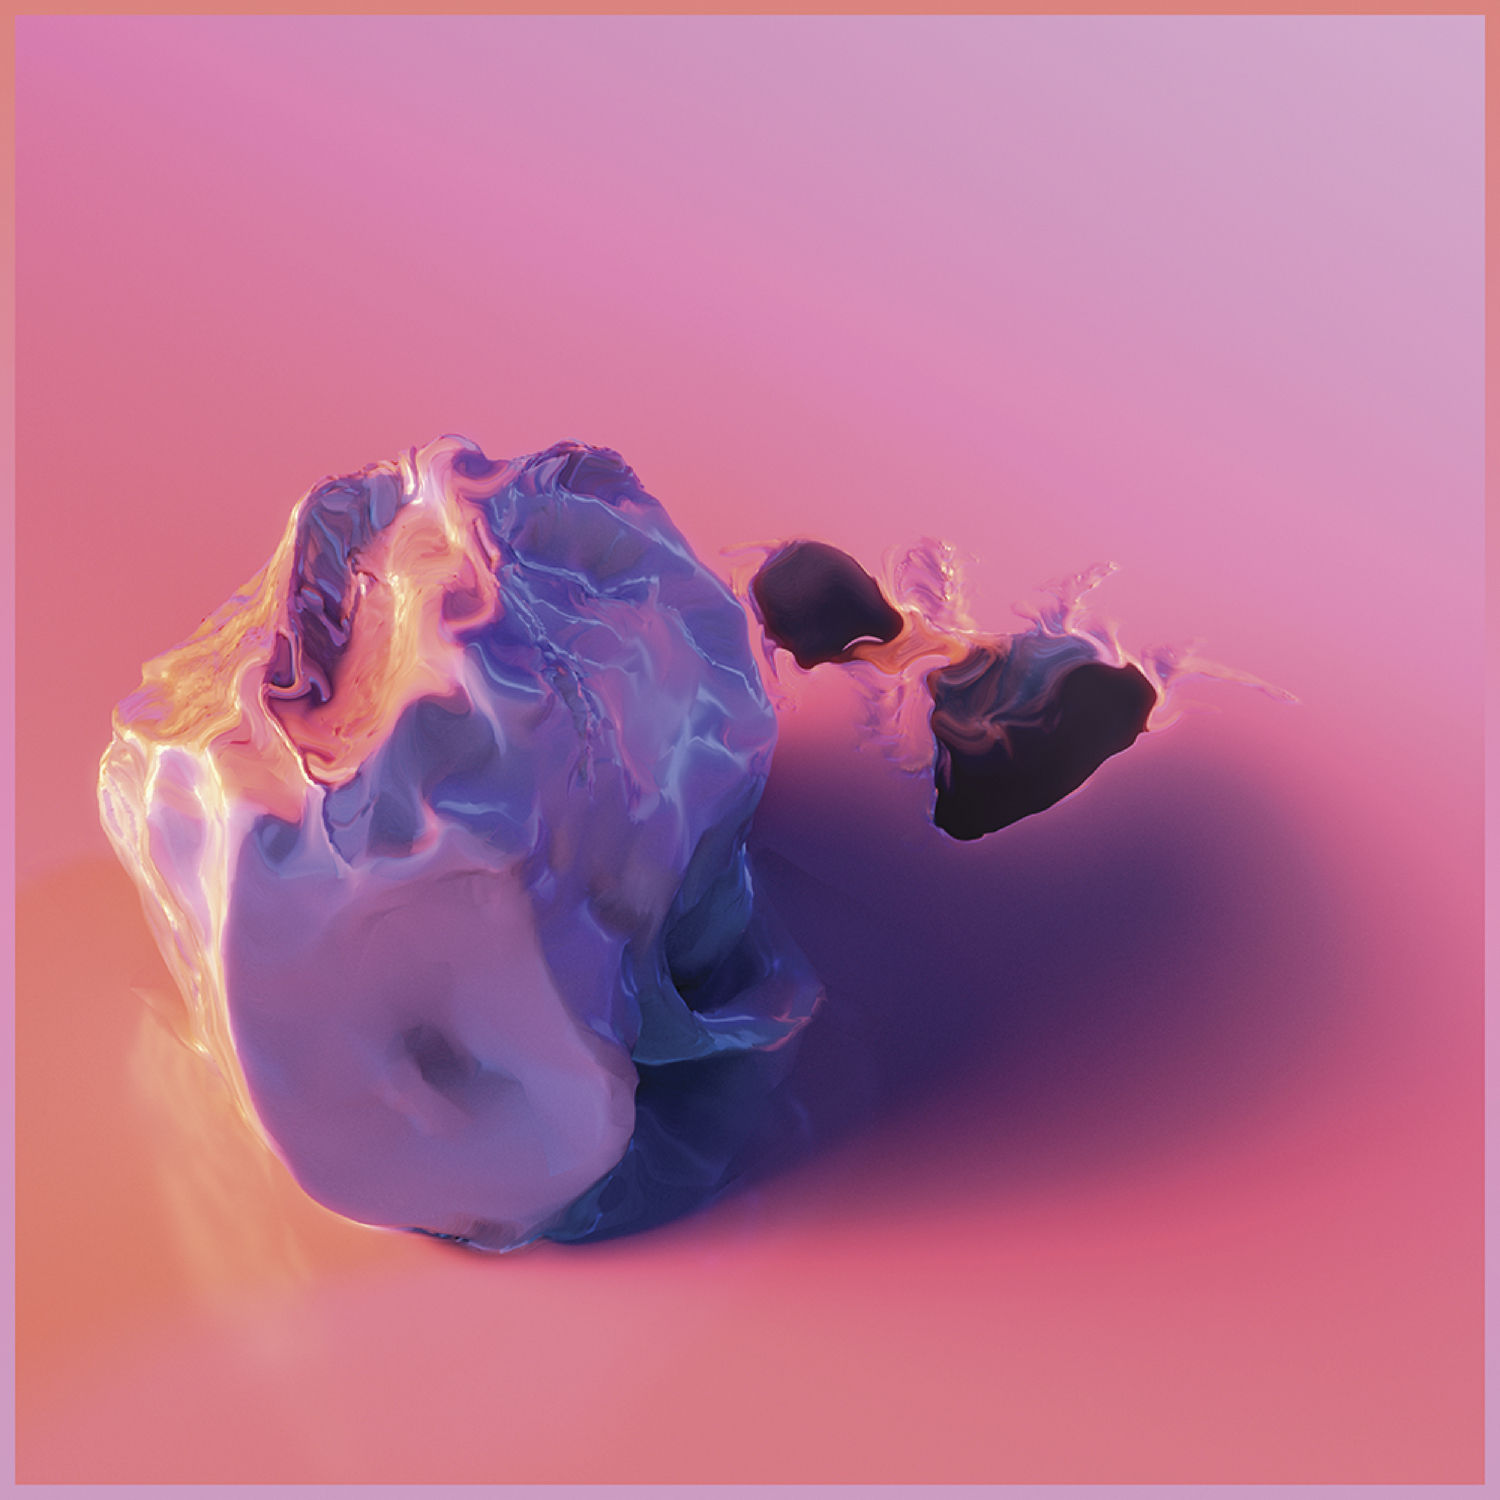 Review of 'Falsework' the new album by Young Galaxy.